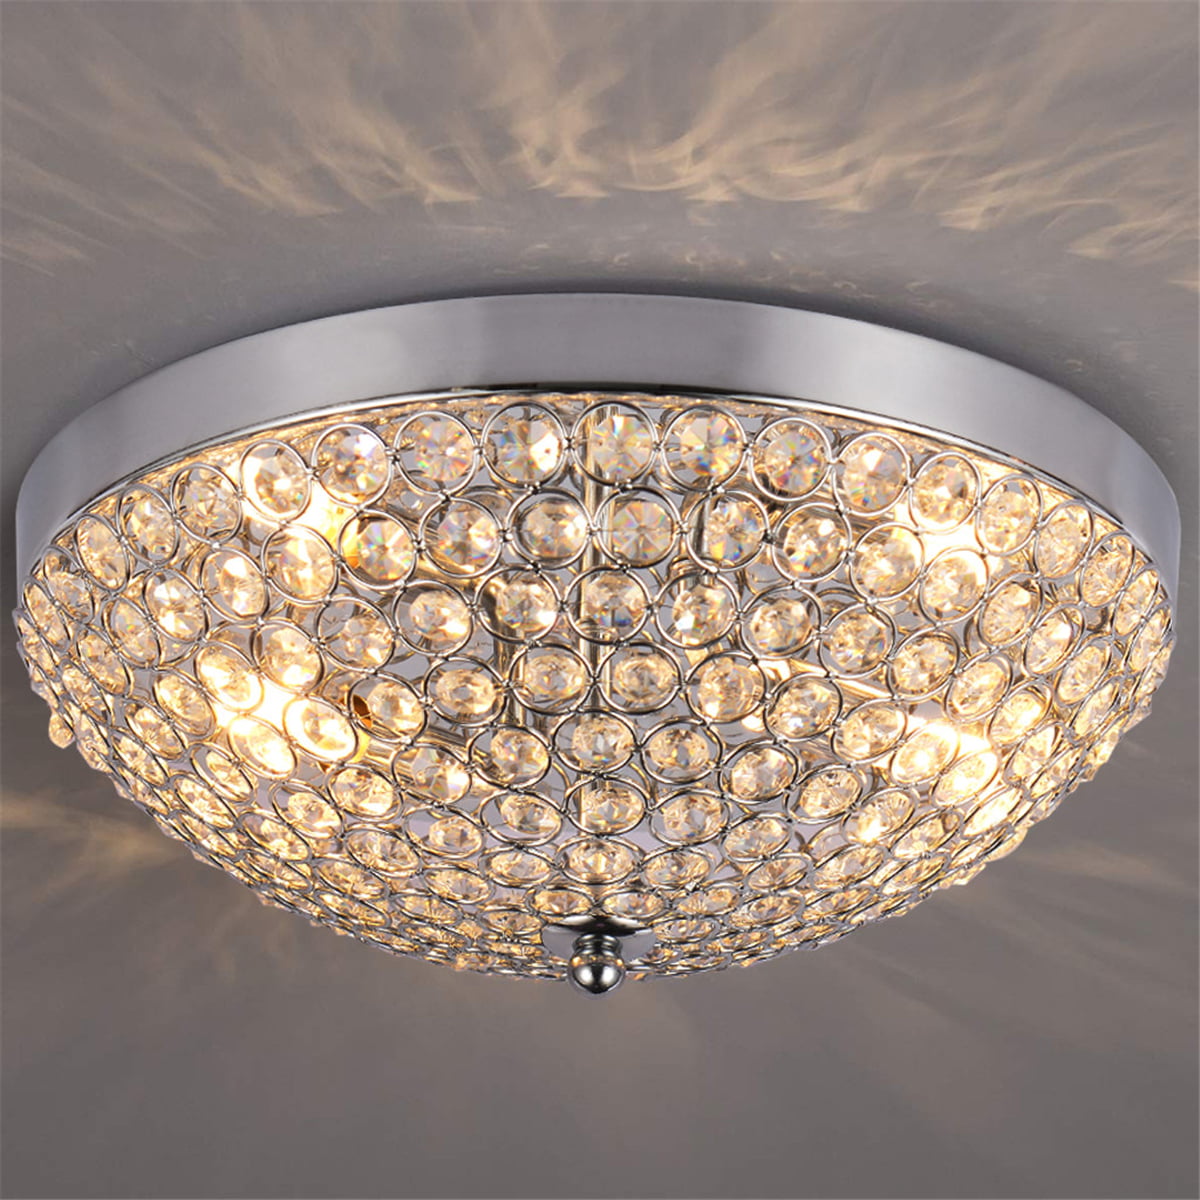 SOZOMO Crystal Chandeliers with 3- Lights Flush Mount Ceiling Light for Bedroom Hallway 40.75in-180W Modern Gold Crystal Pendant Lighting Office. Living Room Dining Room Wedding